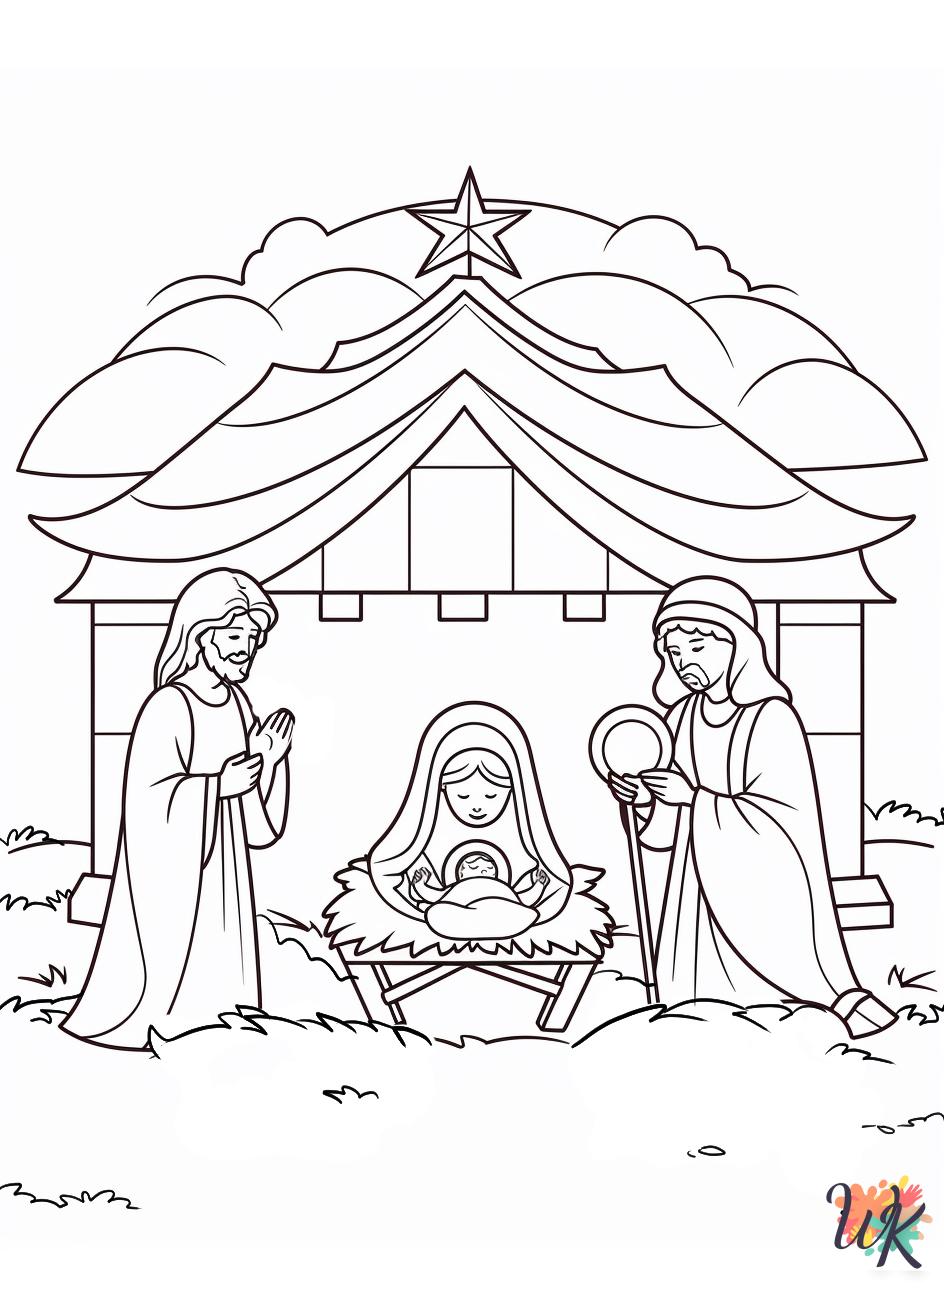 Nativity coloring pages for kids